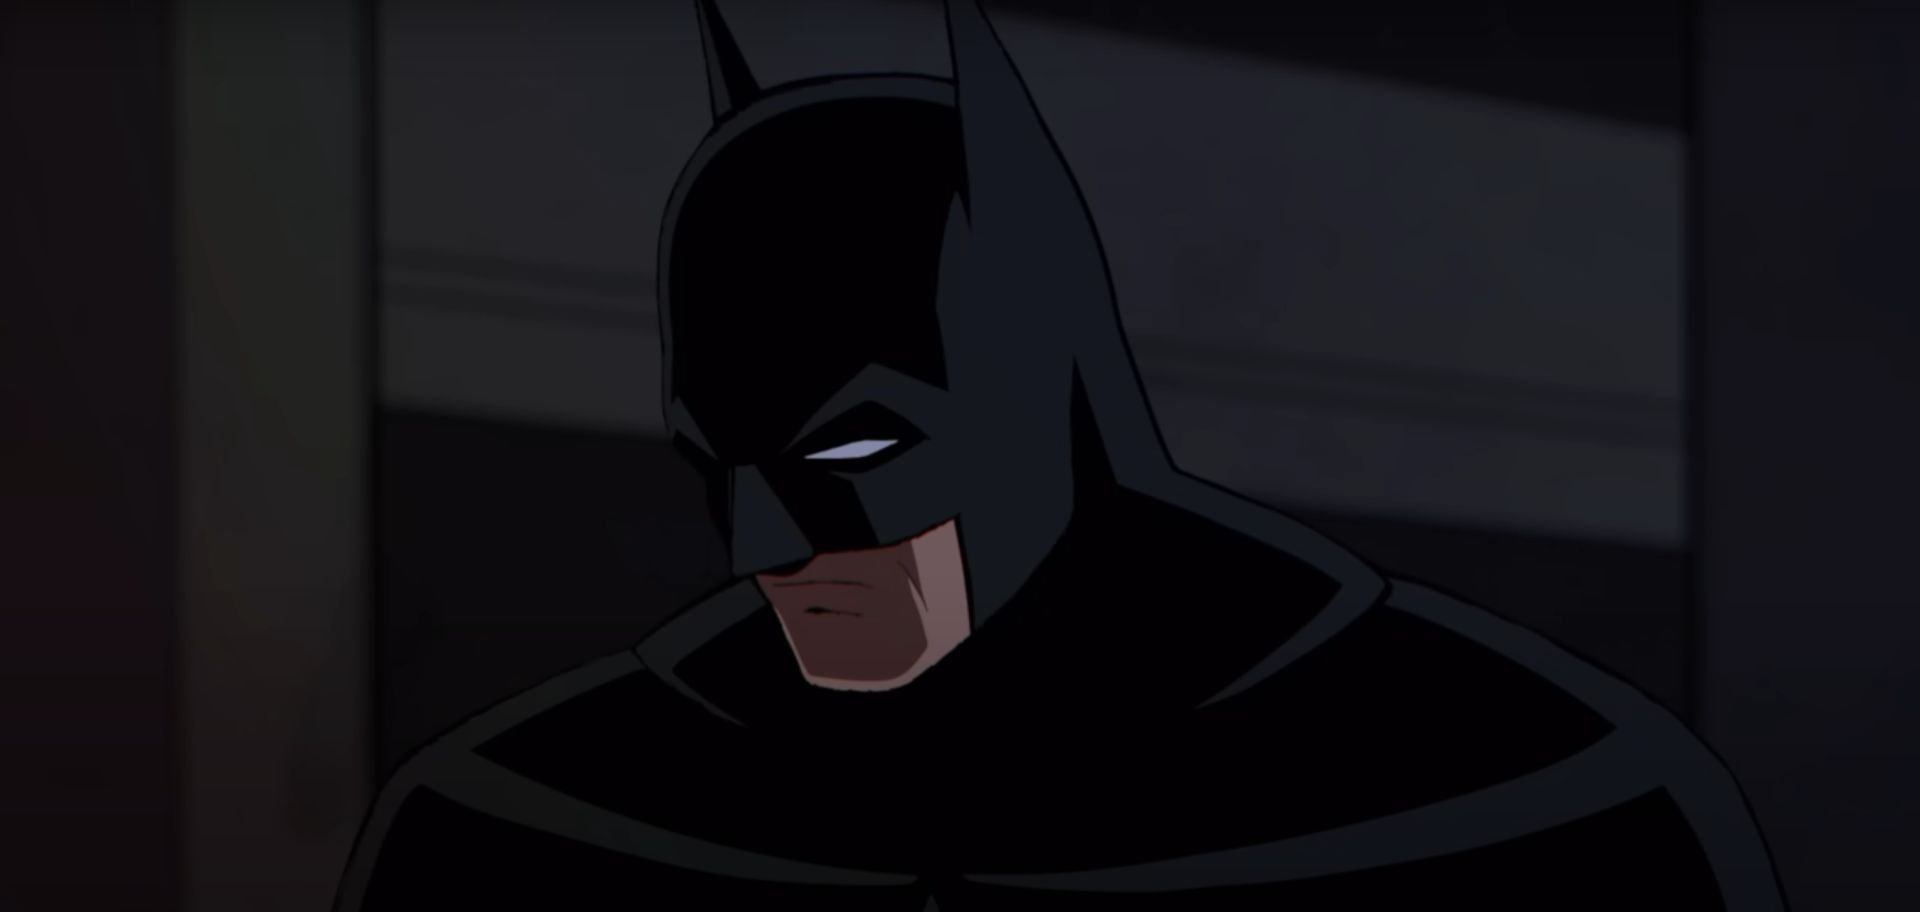 Fanmade Animation Of The End Scene From DARK KNIGHT Featuring Kevin Conroy  Proves He Was The Best BATMAN — GeekTyrant